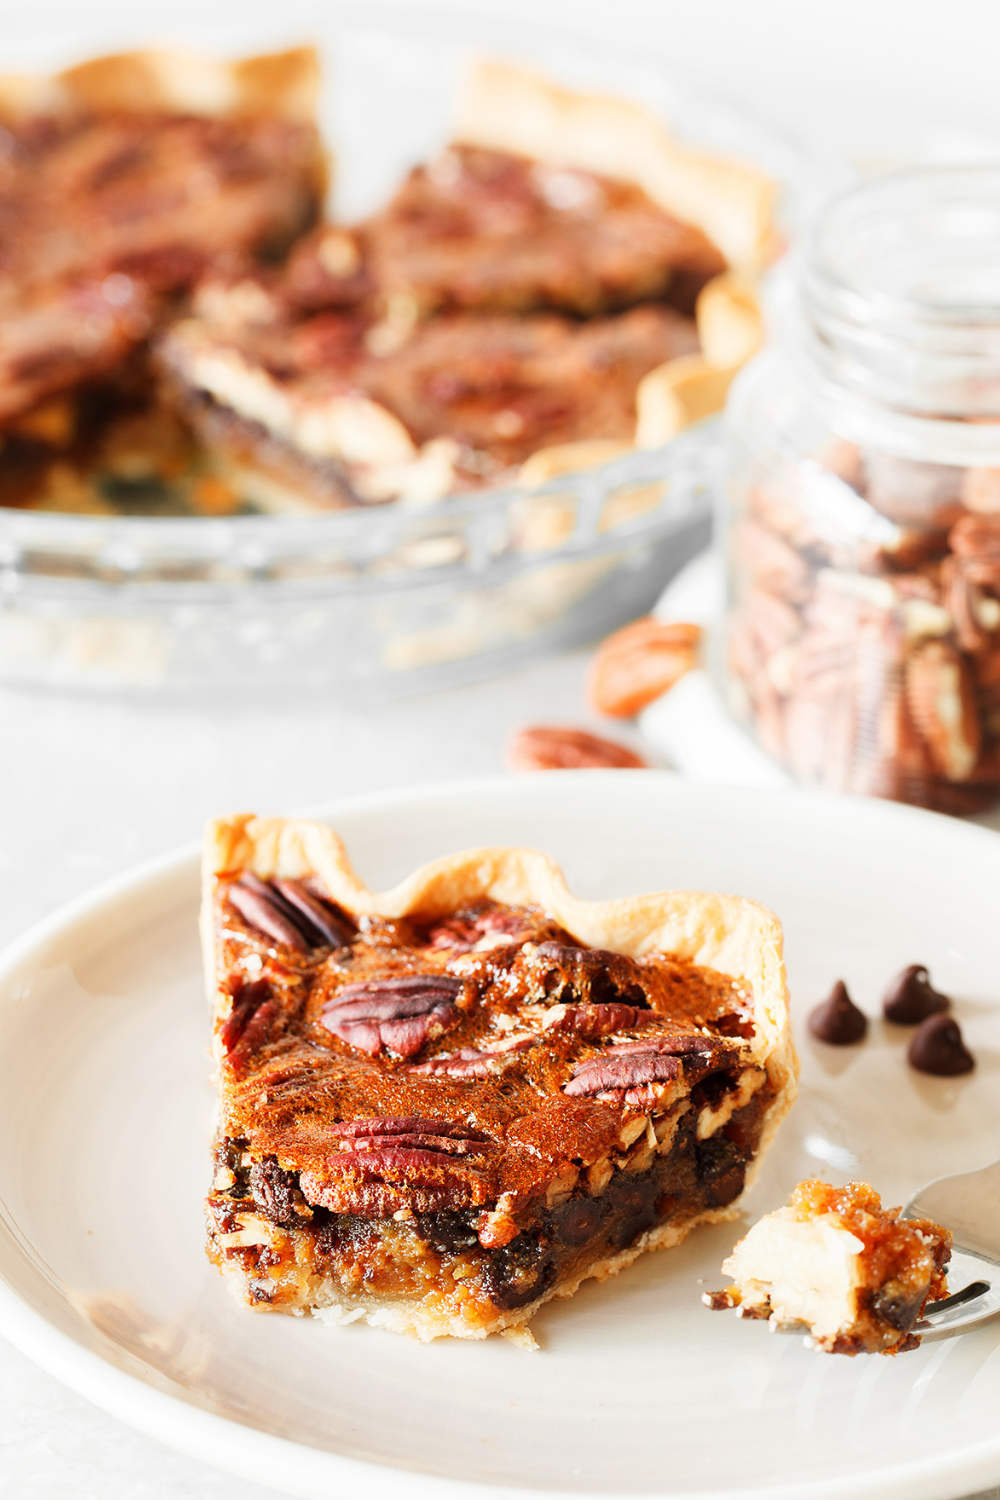 a large slice of chocolate pecan pie on a plate, ready for serving